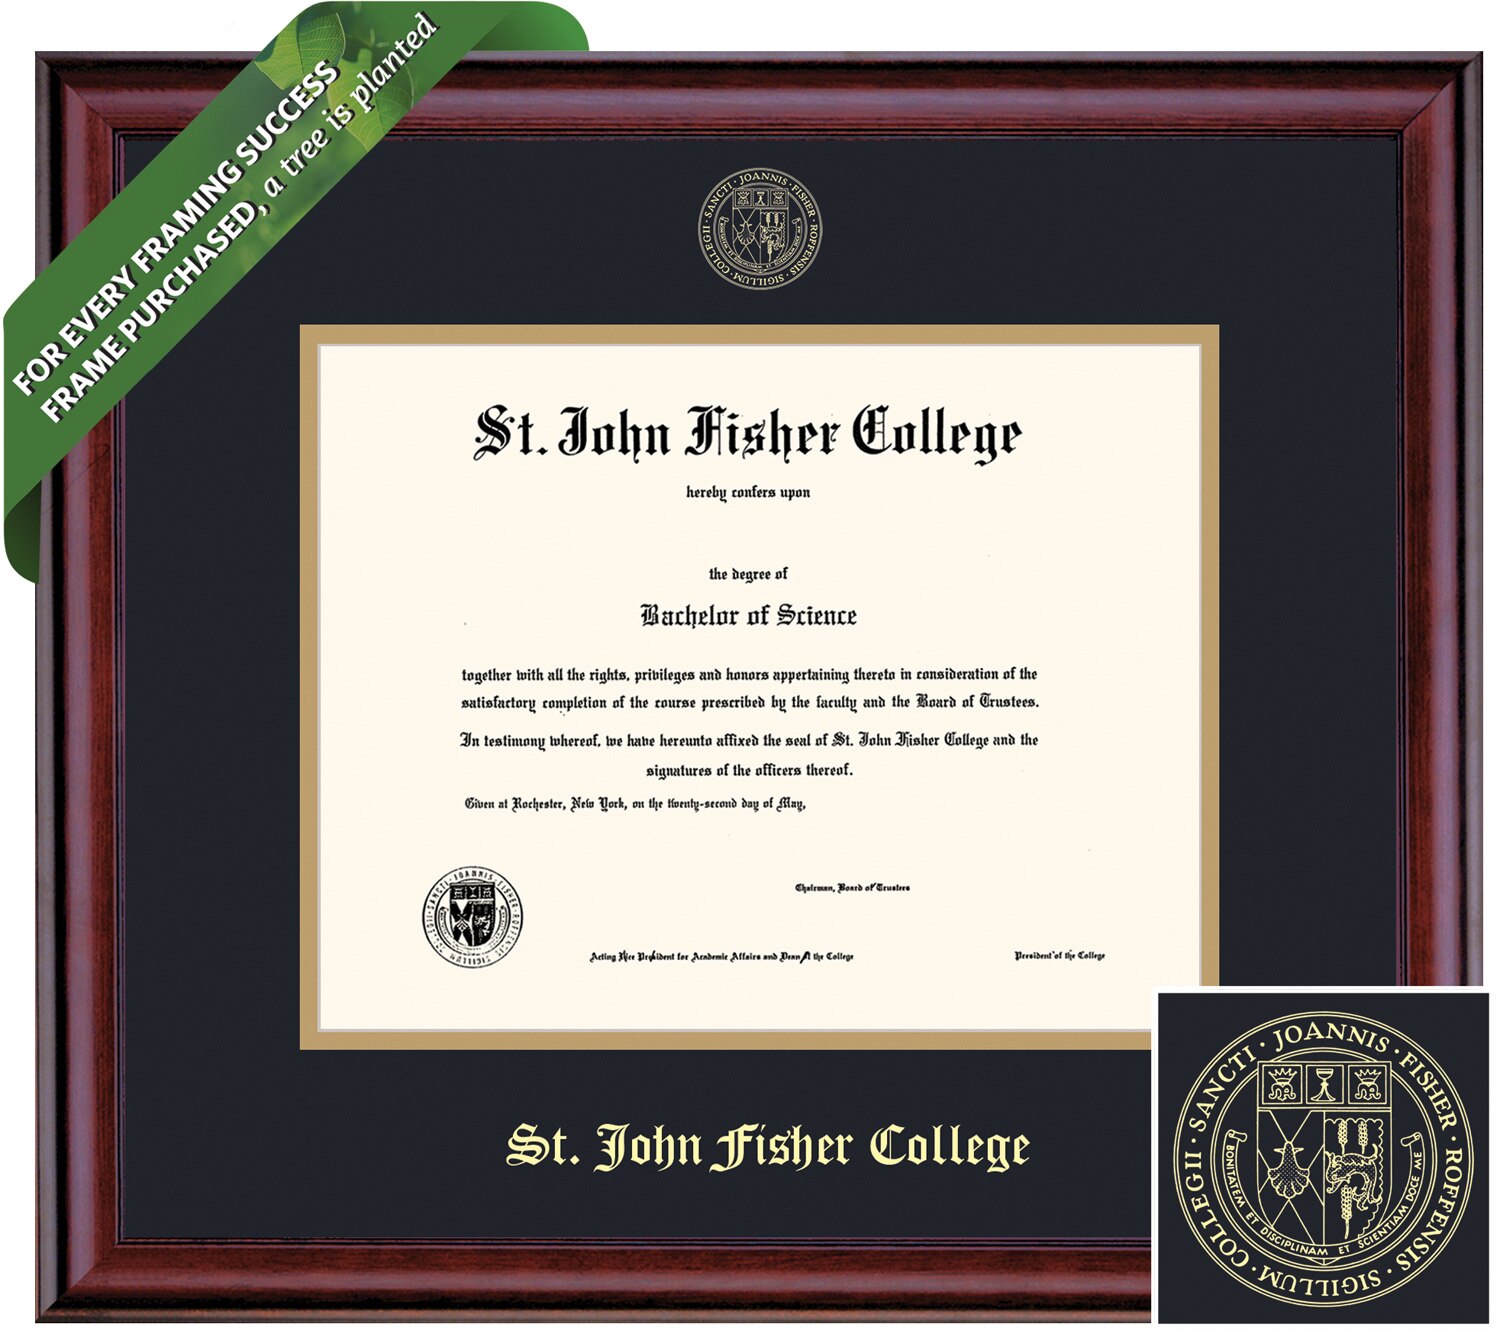 Framing Success 8.5 x 11 Classic Gold Embossed School Seal Bachelors, Masters Diploma Frame